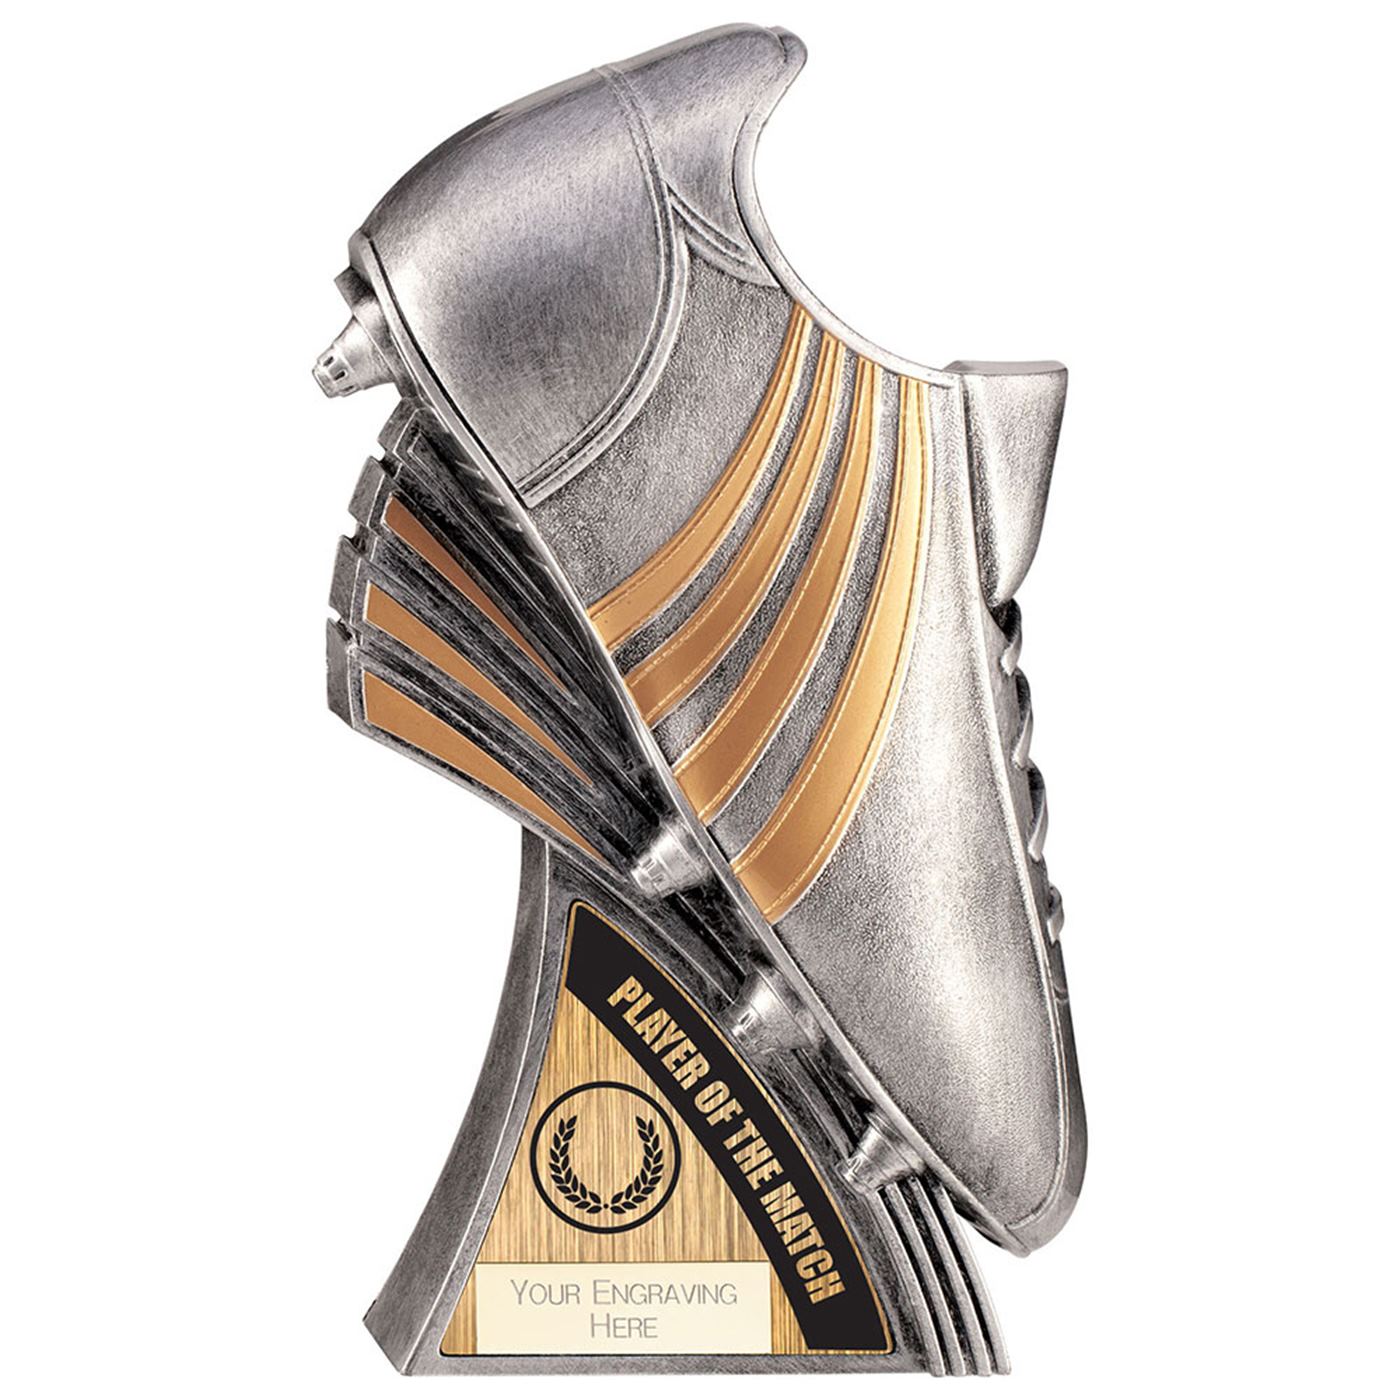 Power Boot Heavyweight Football Trophy Player of the Match - Antique Silver